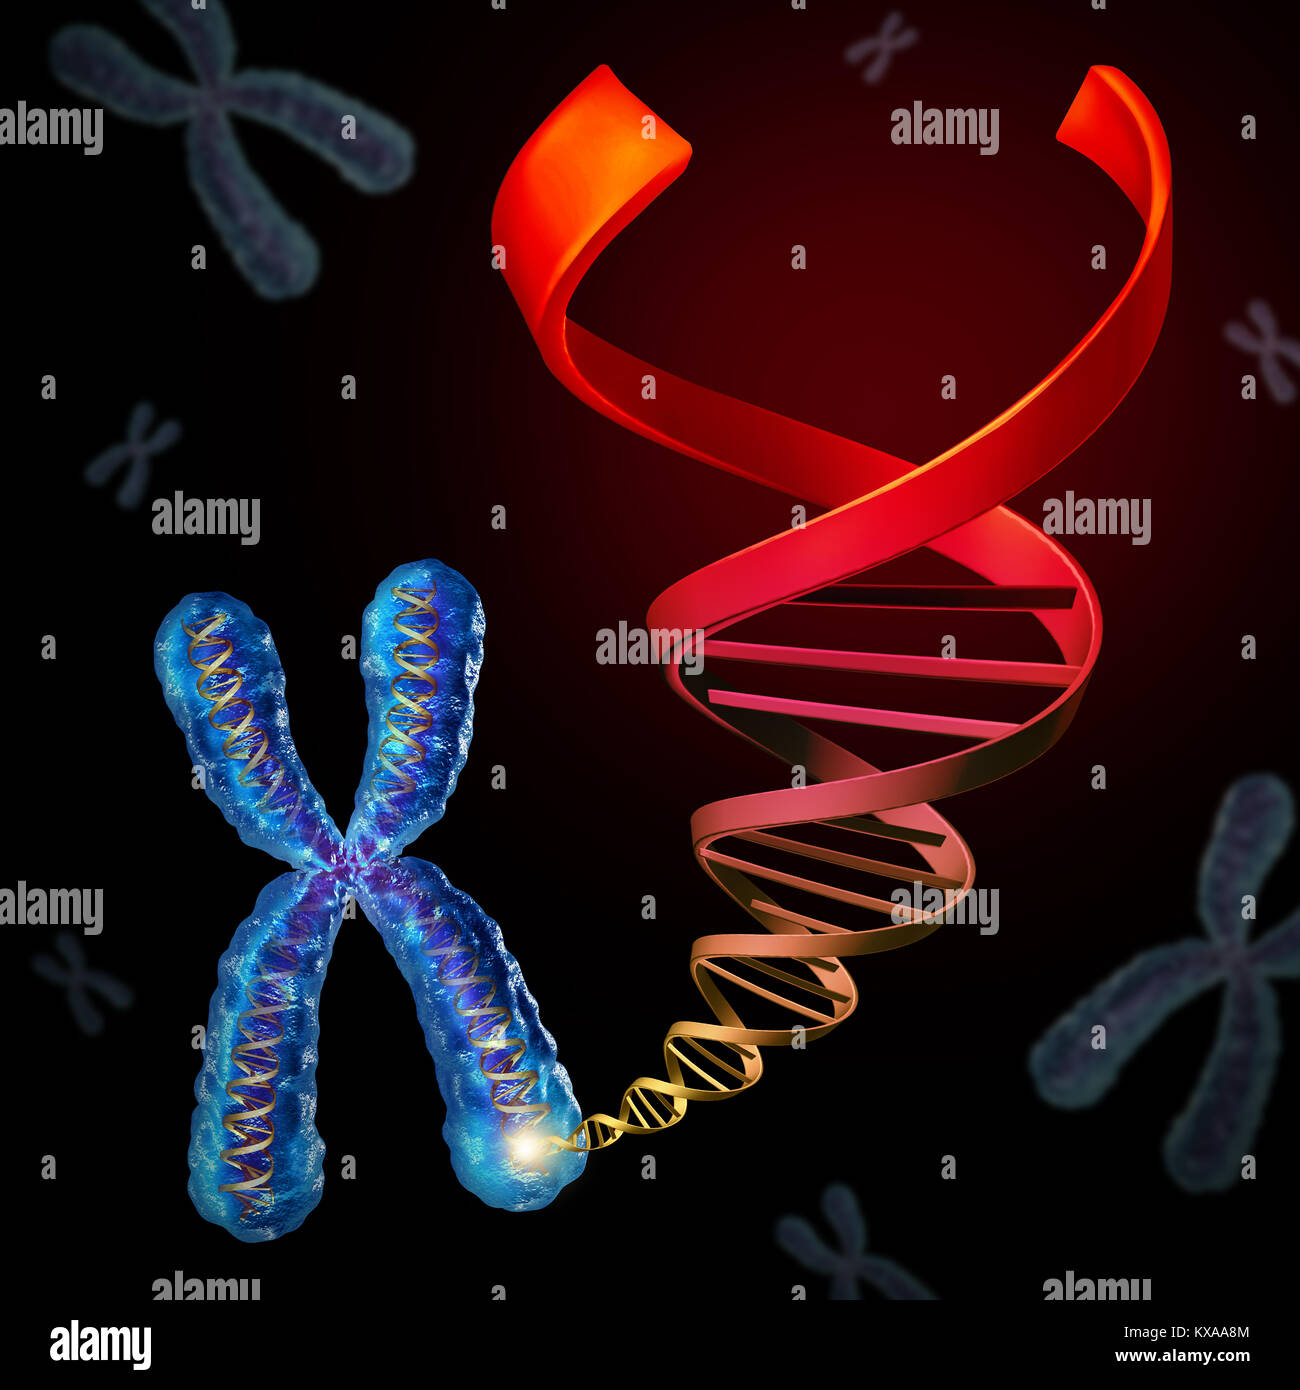 Chromosome dna as genetic material inside chromosomes as a biotechnology and gene therapy or immunotherapy concept as a 3D illustration. Stock Photo